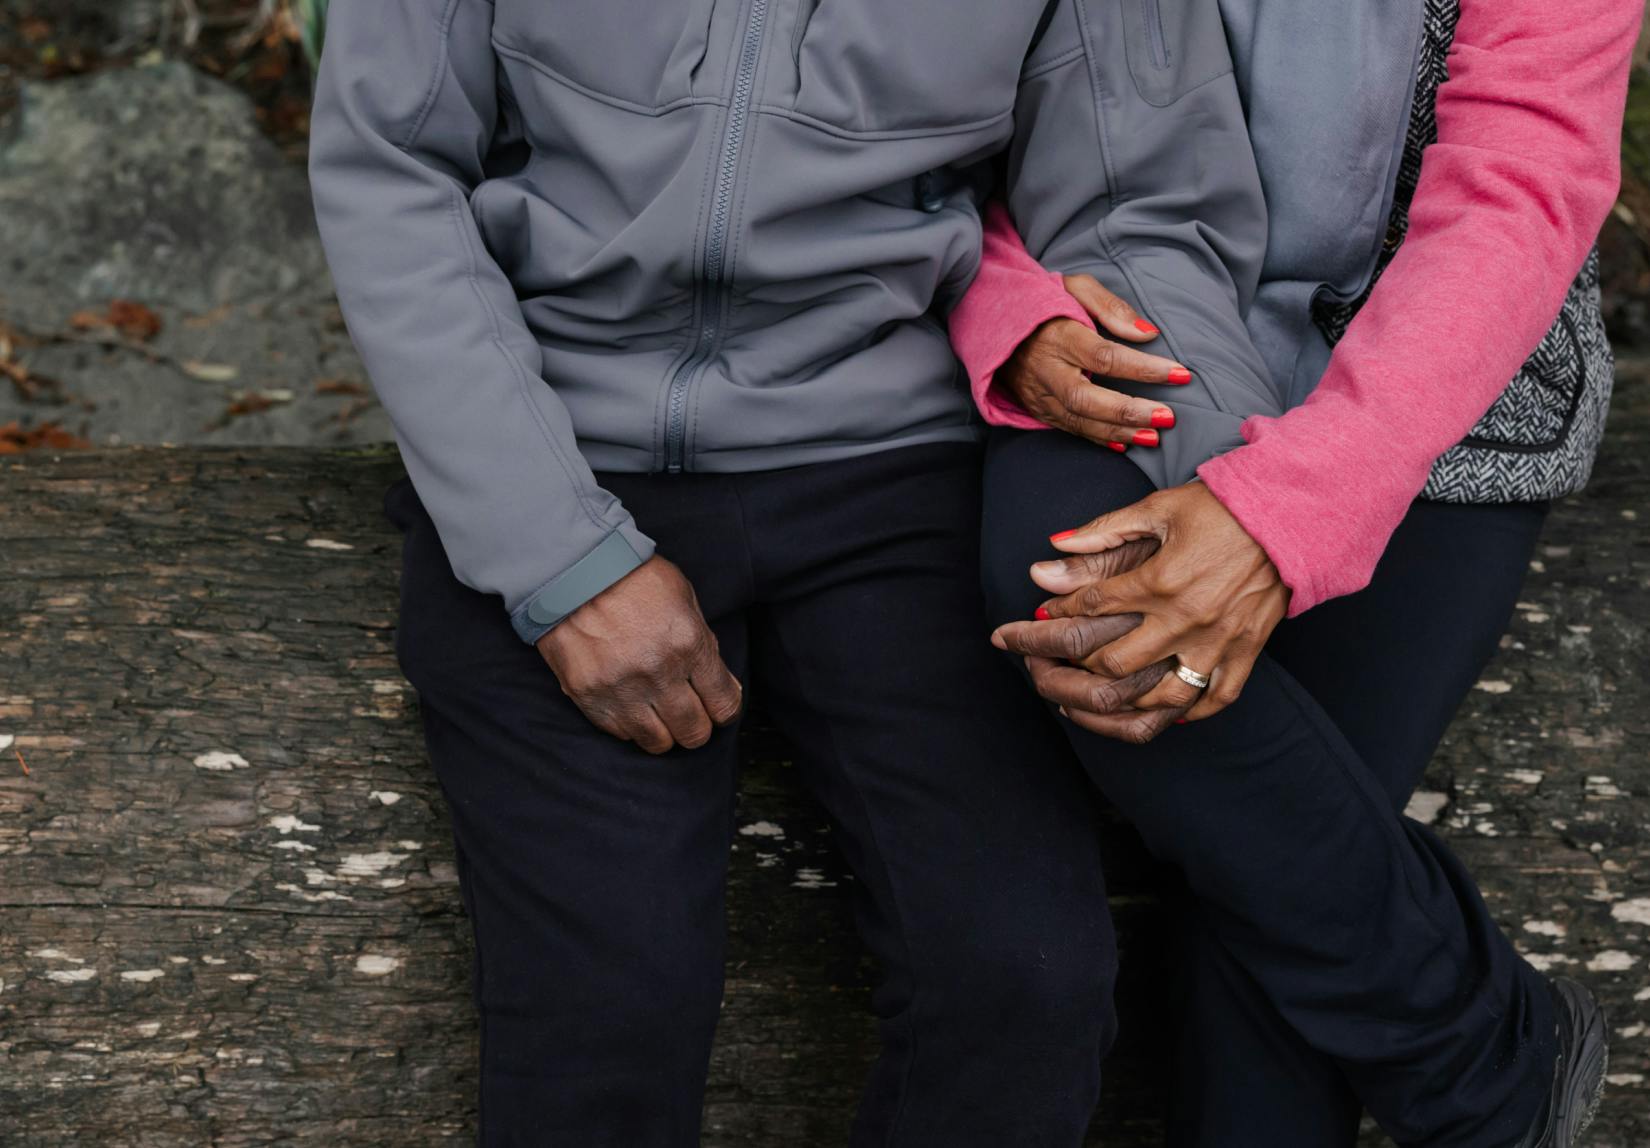 Couple seated holding hands.